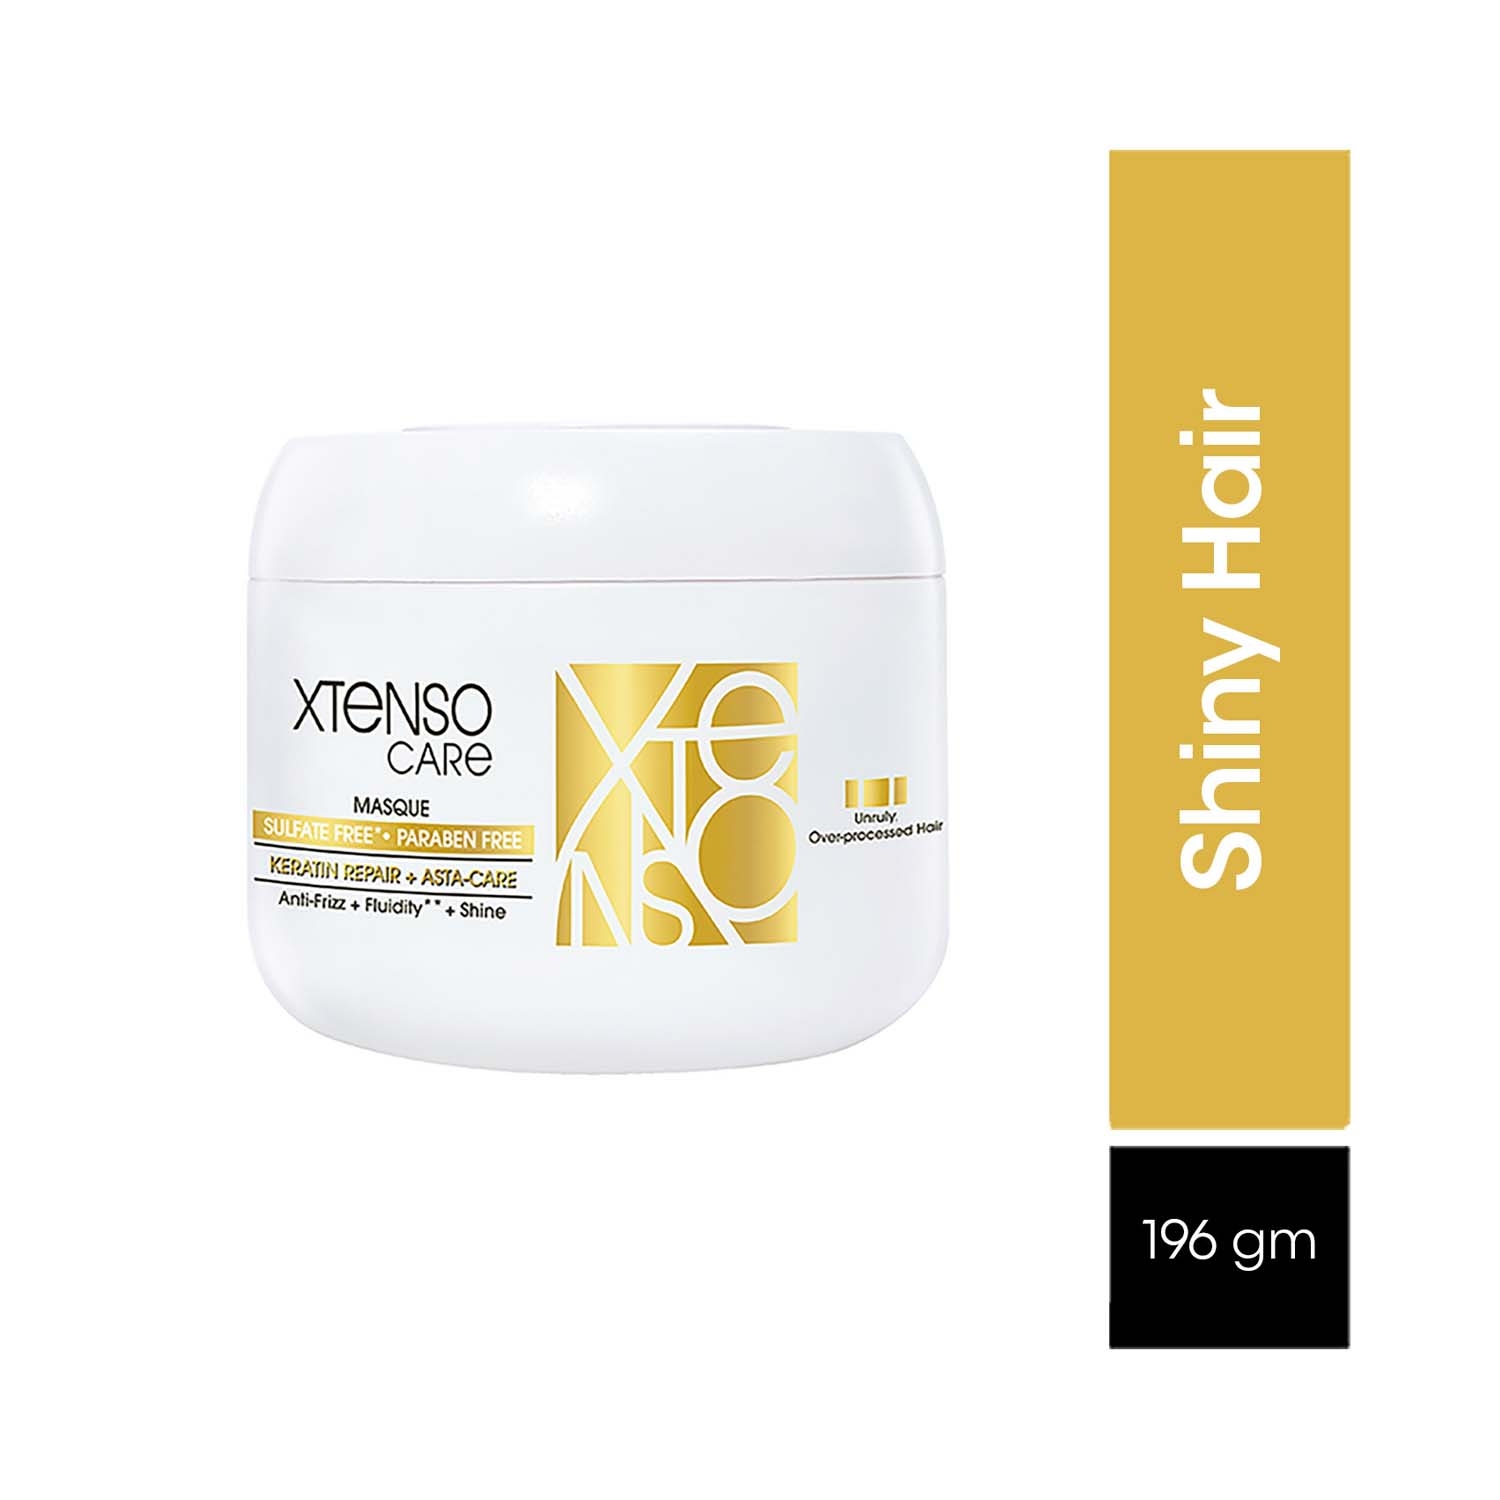 L'Oreal Professionnel | L'Oreal Professionnel Xtenso Care Sulfate-Free Hair Mask (196ml)